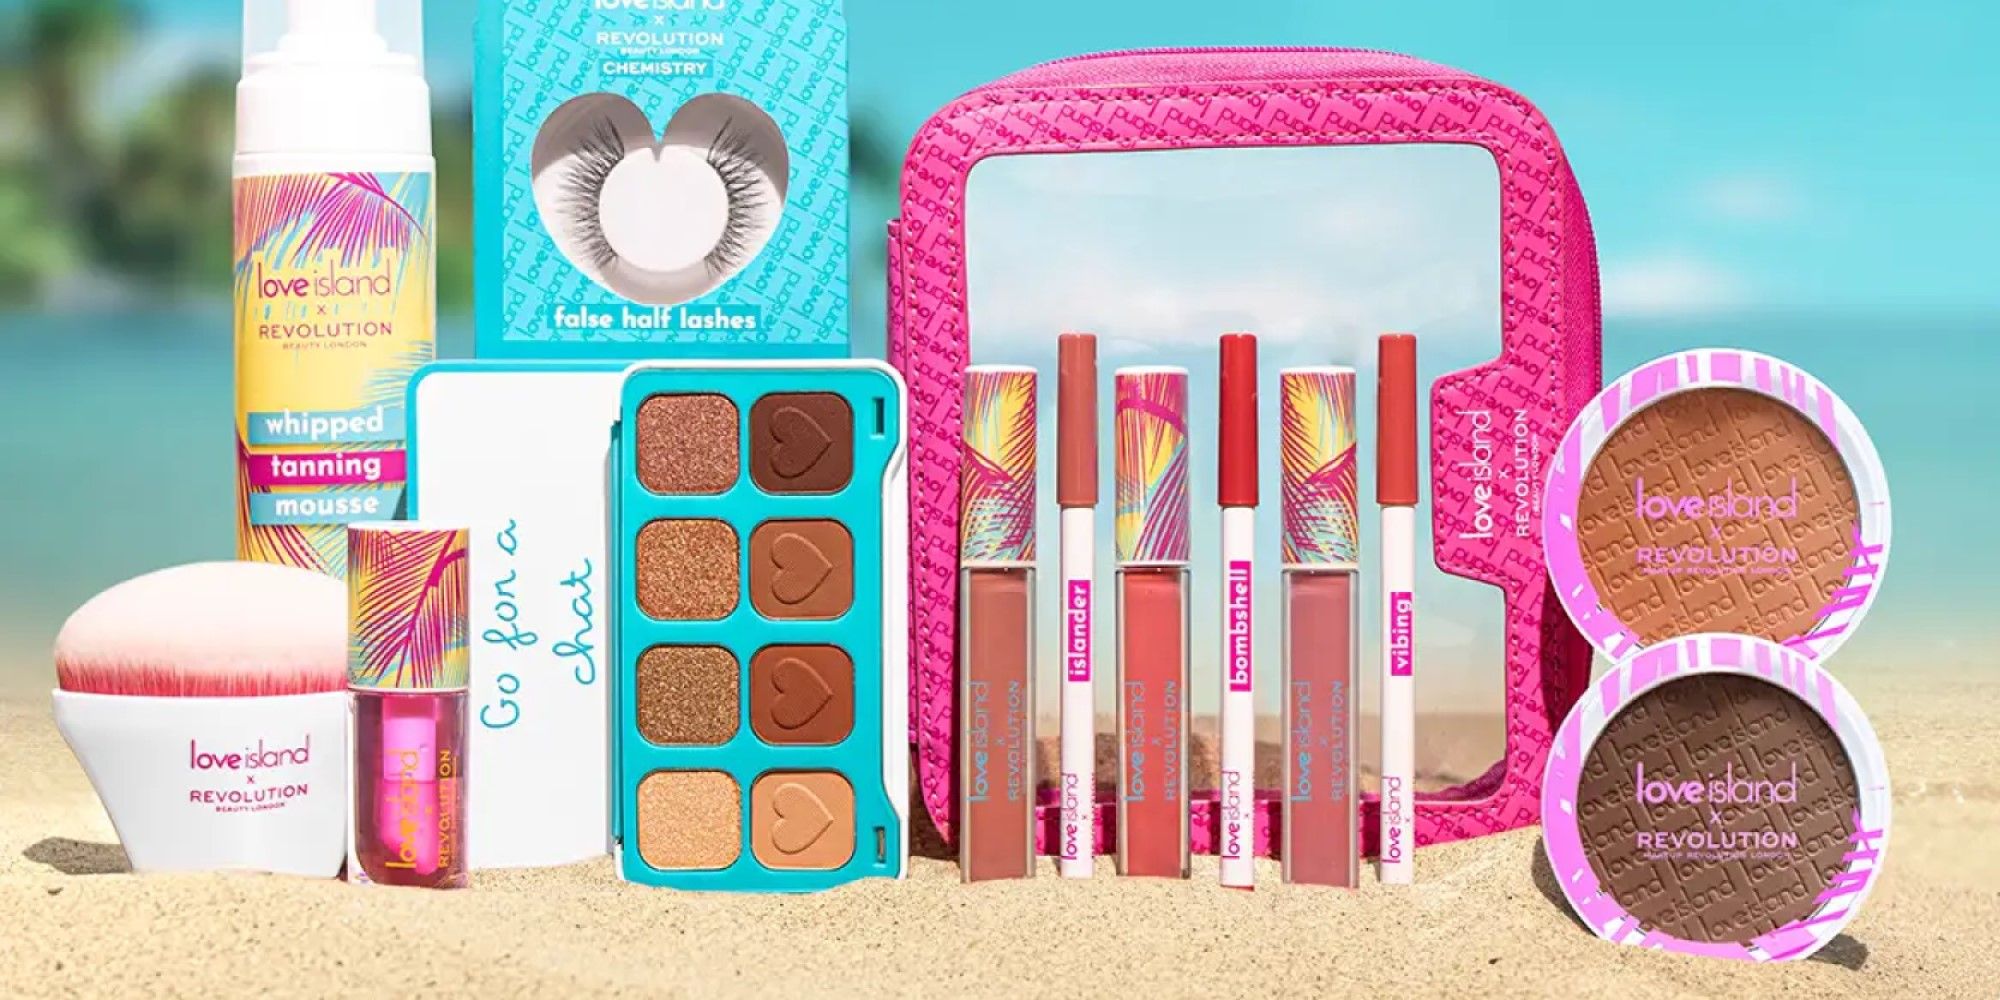 ‘Love Island’ Makeup Collection by Revolution Beauty Available at Walgreens